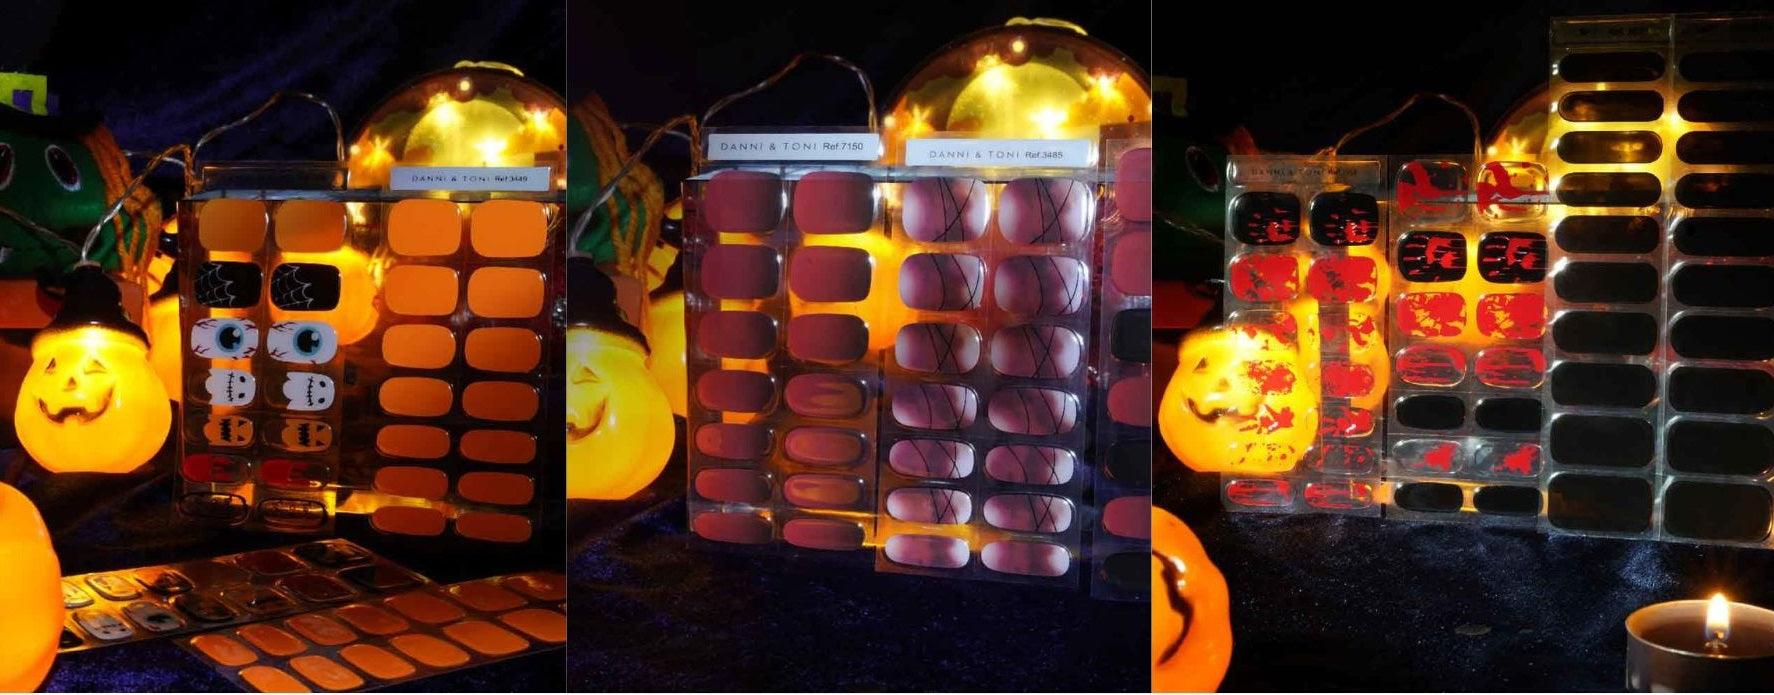 Fun, Spooky, and Glowing Nails that Will Light Up Your Halloween - dannitoni.com